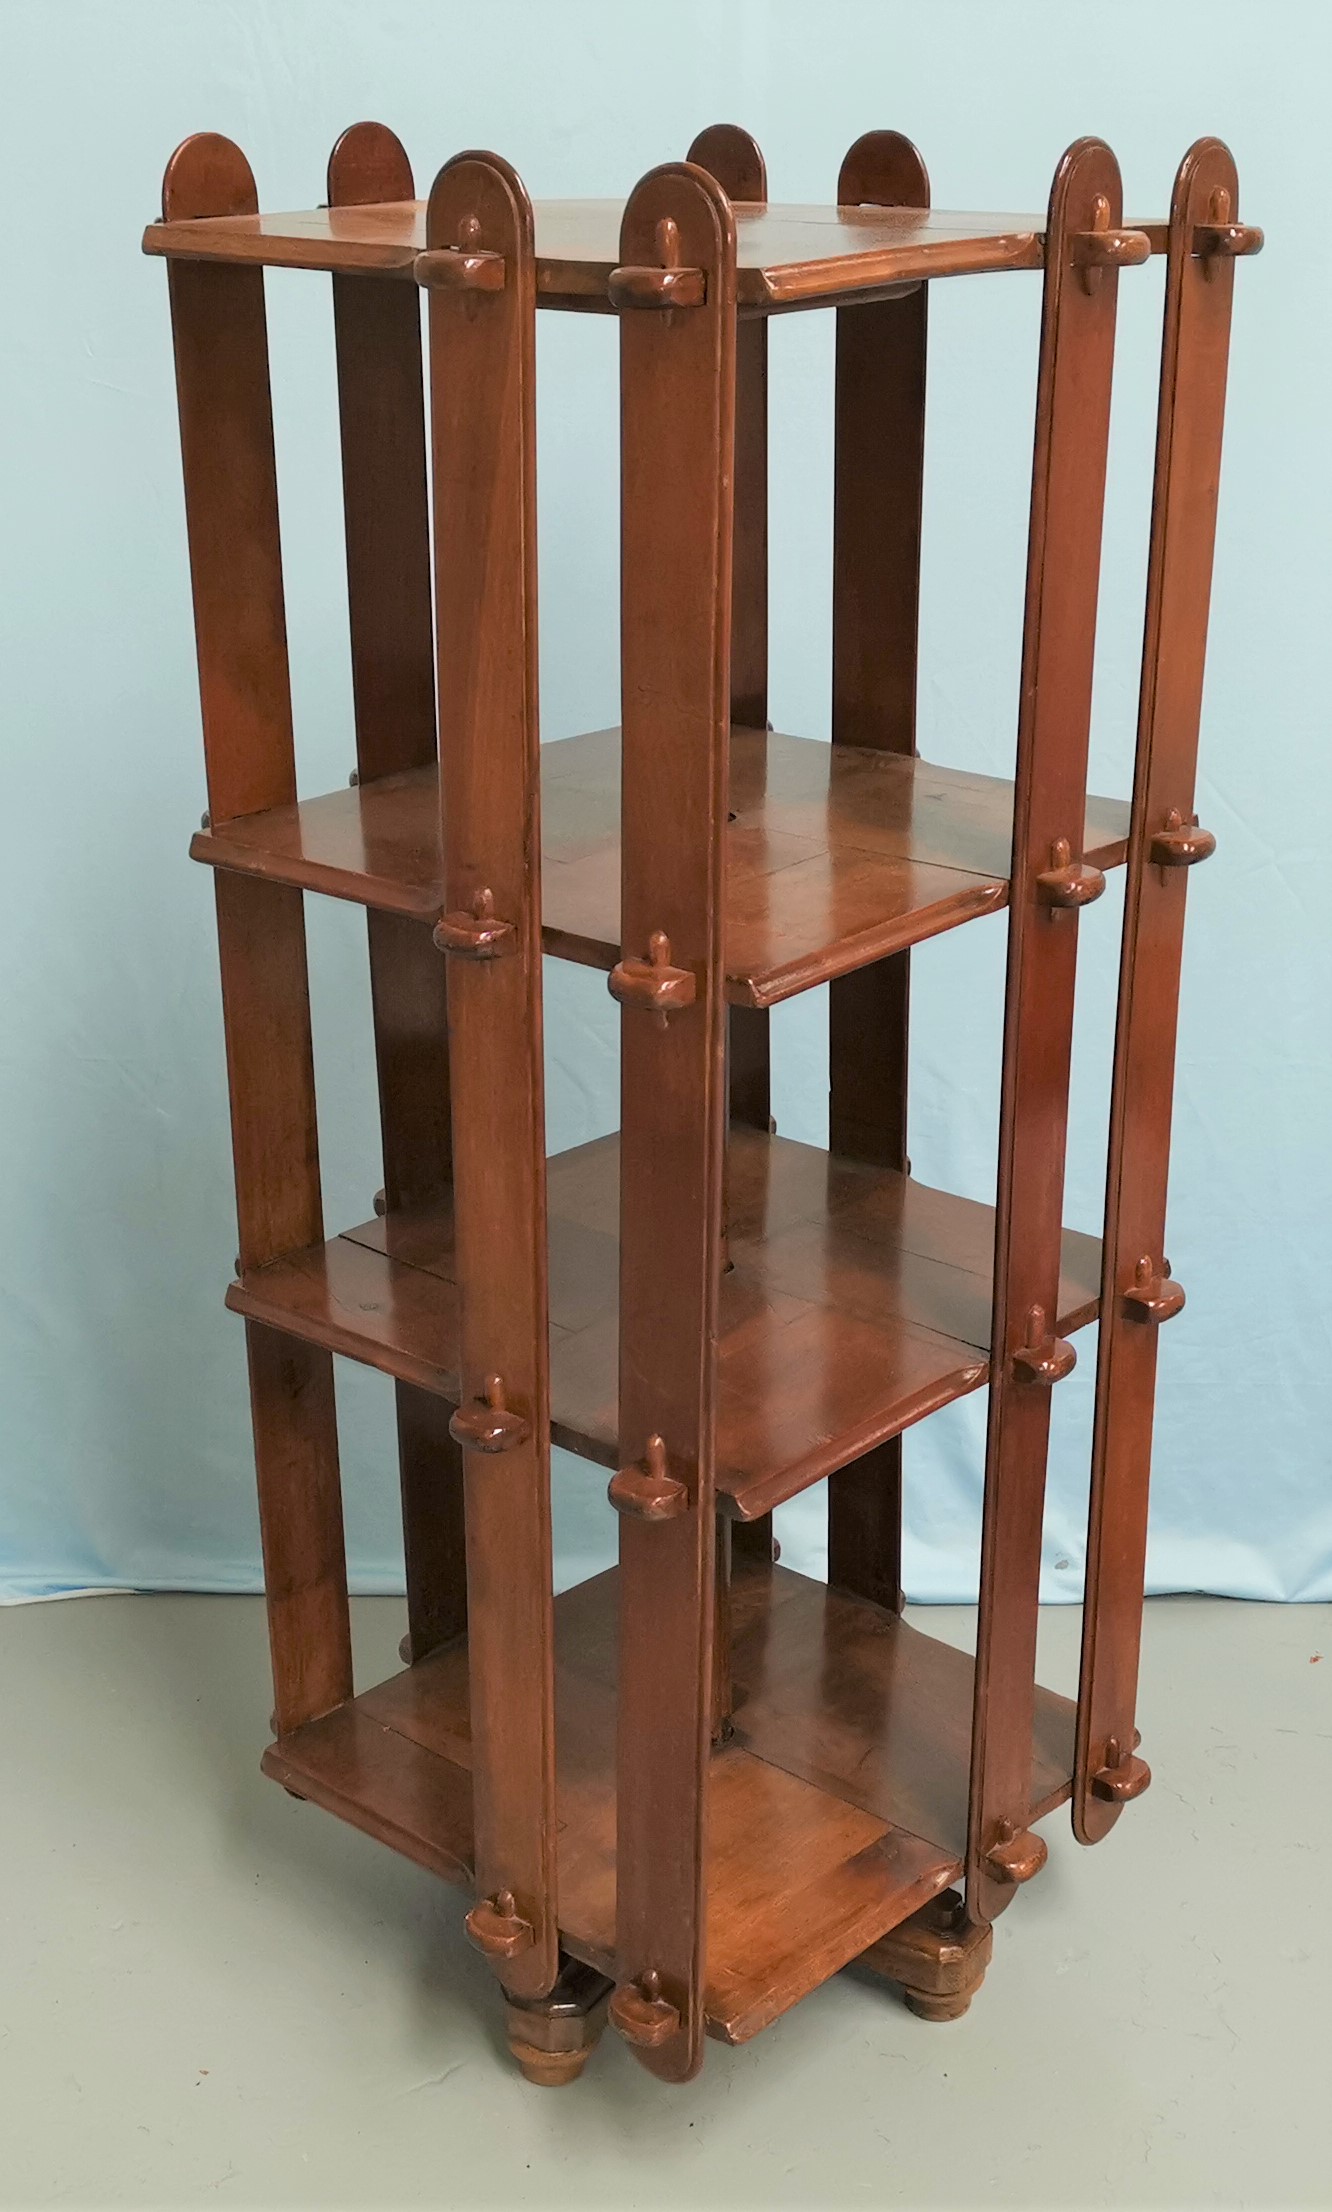 A 3 height sectional bookcase in slotted and pegged stained wood, height 116 cm